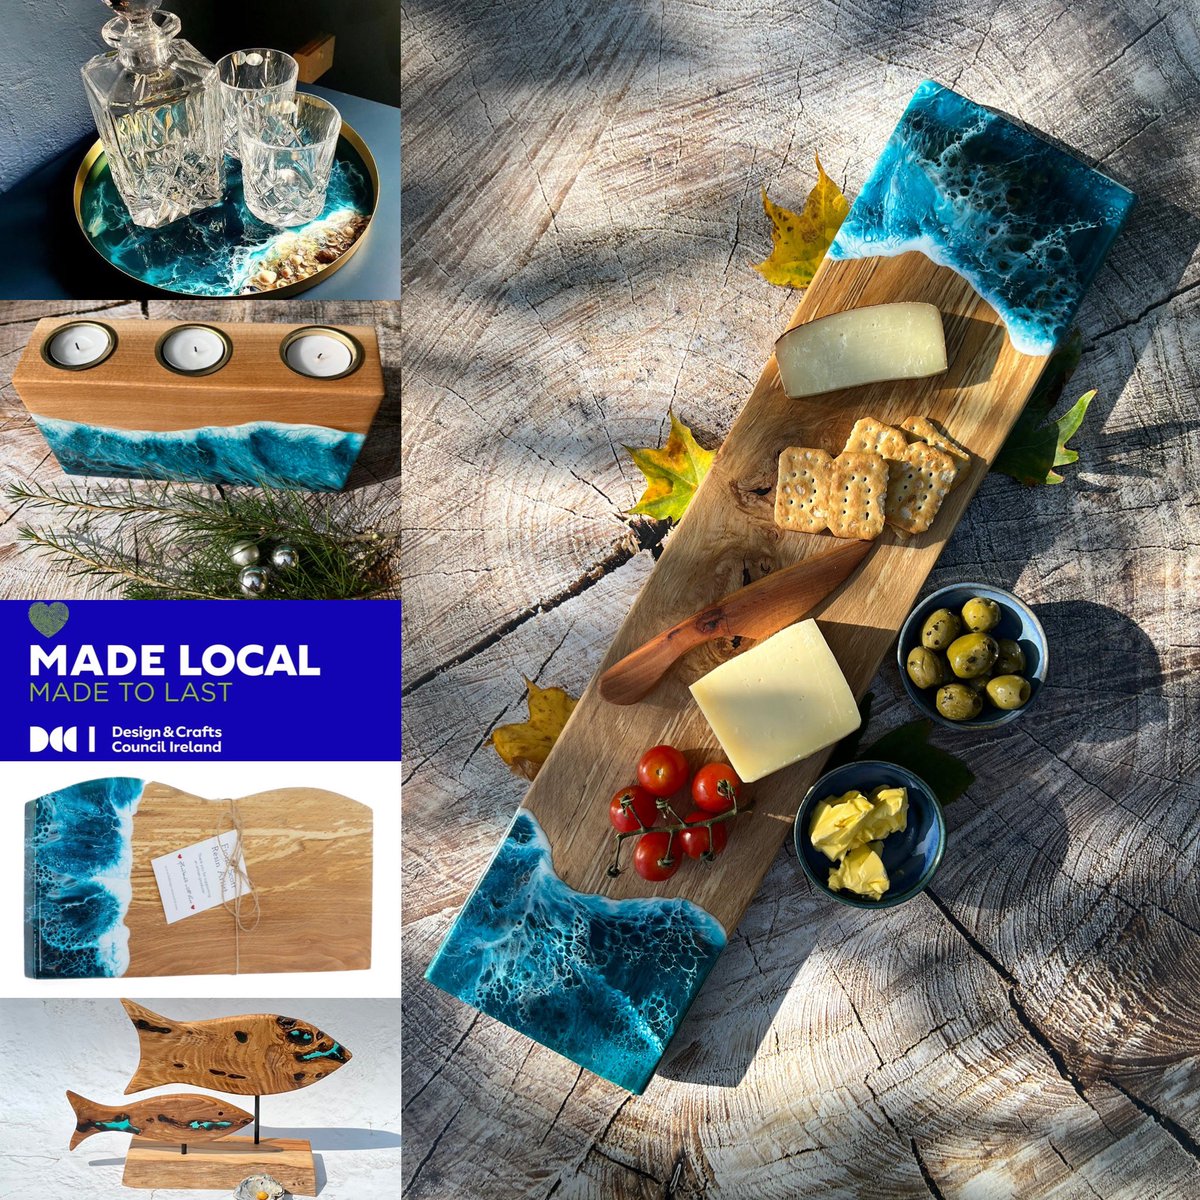 Handcrafted cheese boards, candle holders, serving trays and original art pieces all with a splash of colourful Ocean inspired resin art. Beautiful gift ideas for todays modern interiors. Worldwide shipping. fsdesign-resinartist.com #resinart #handmadegift #MHHSBD #irishcrafts